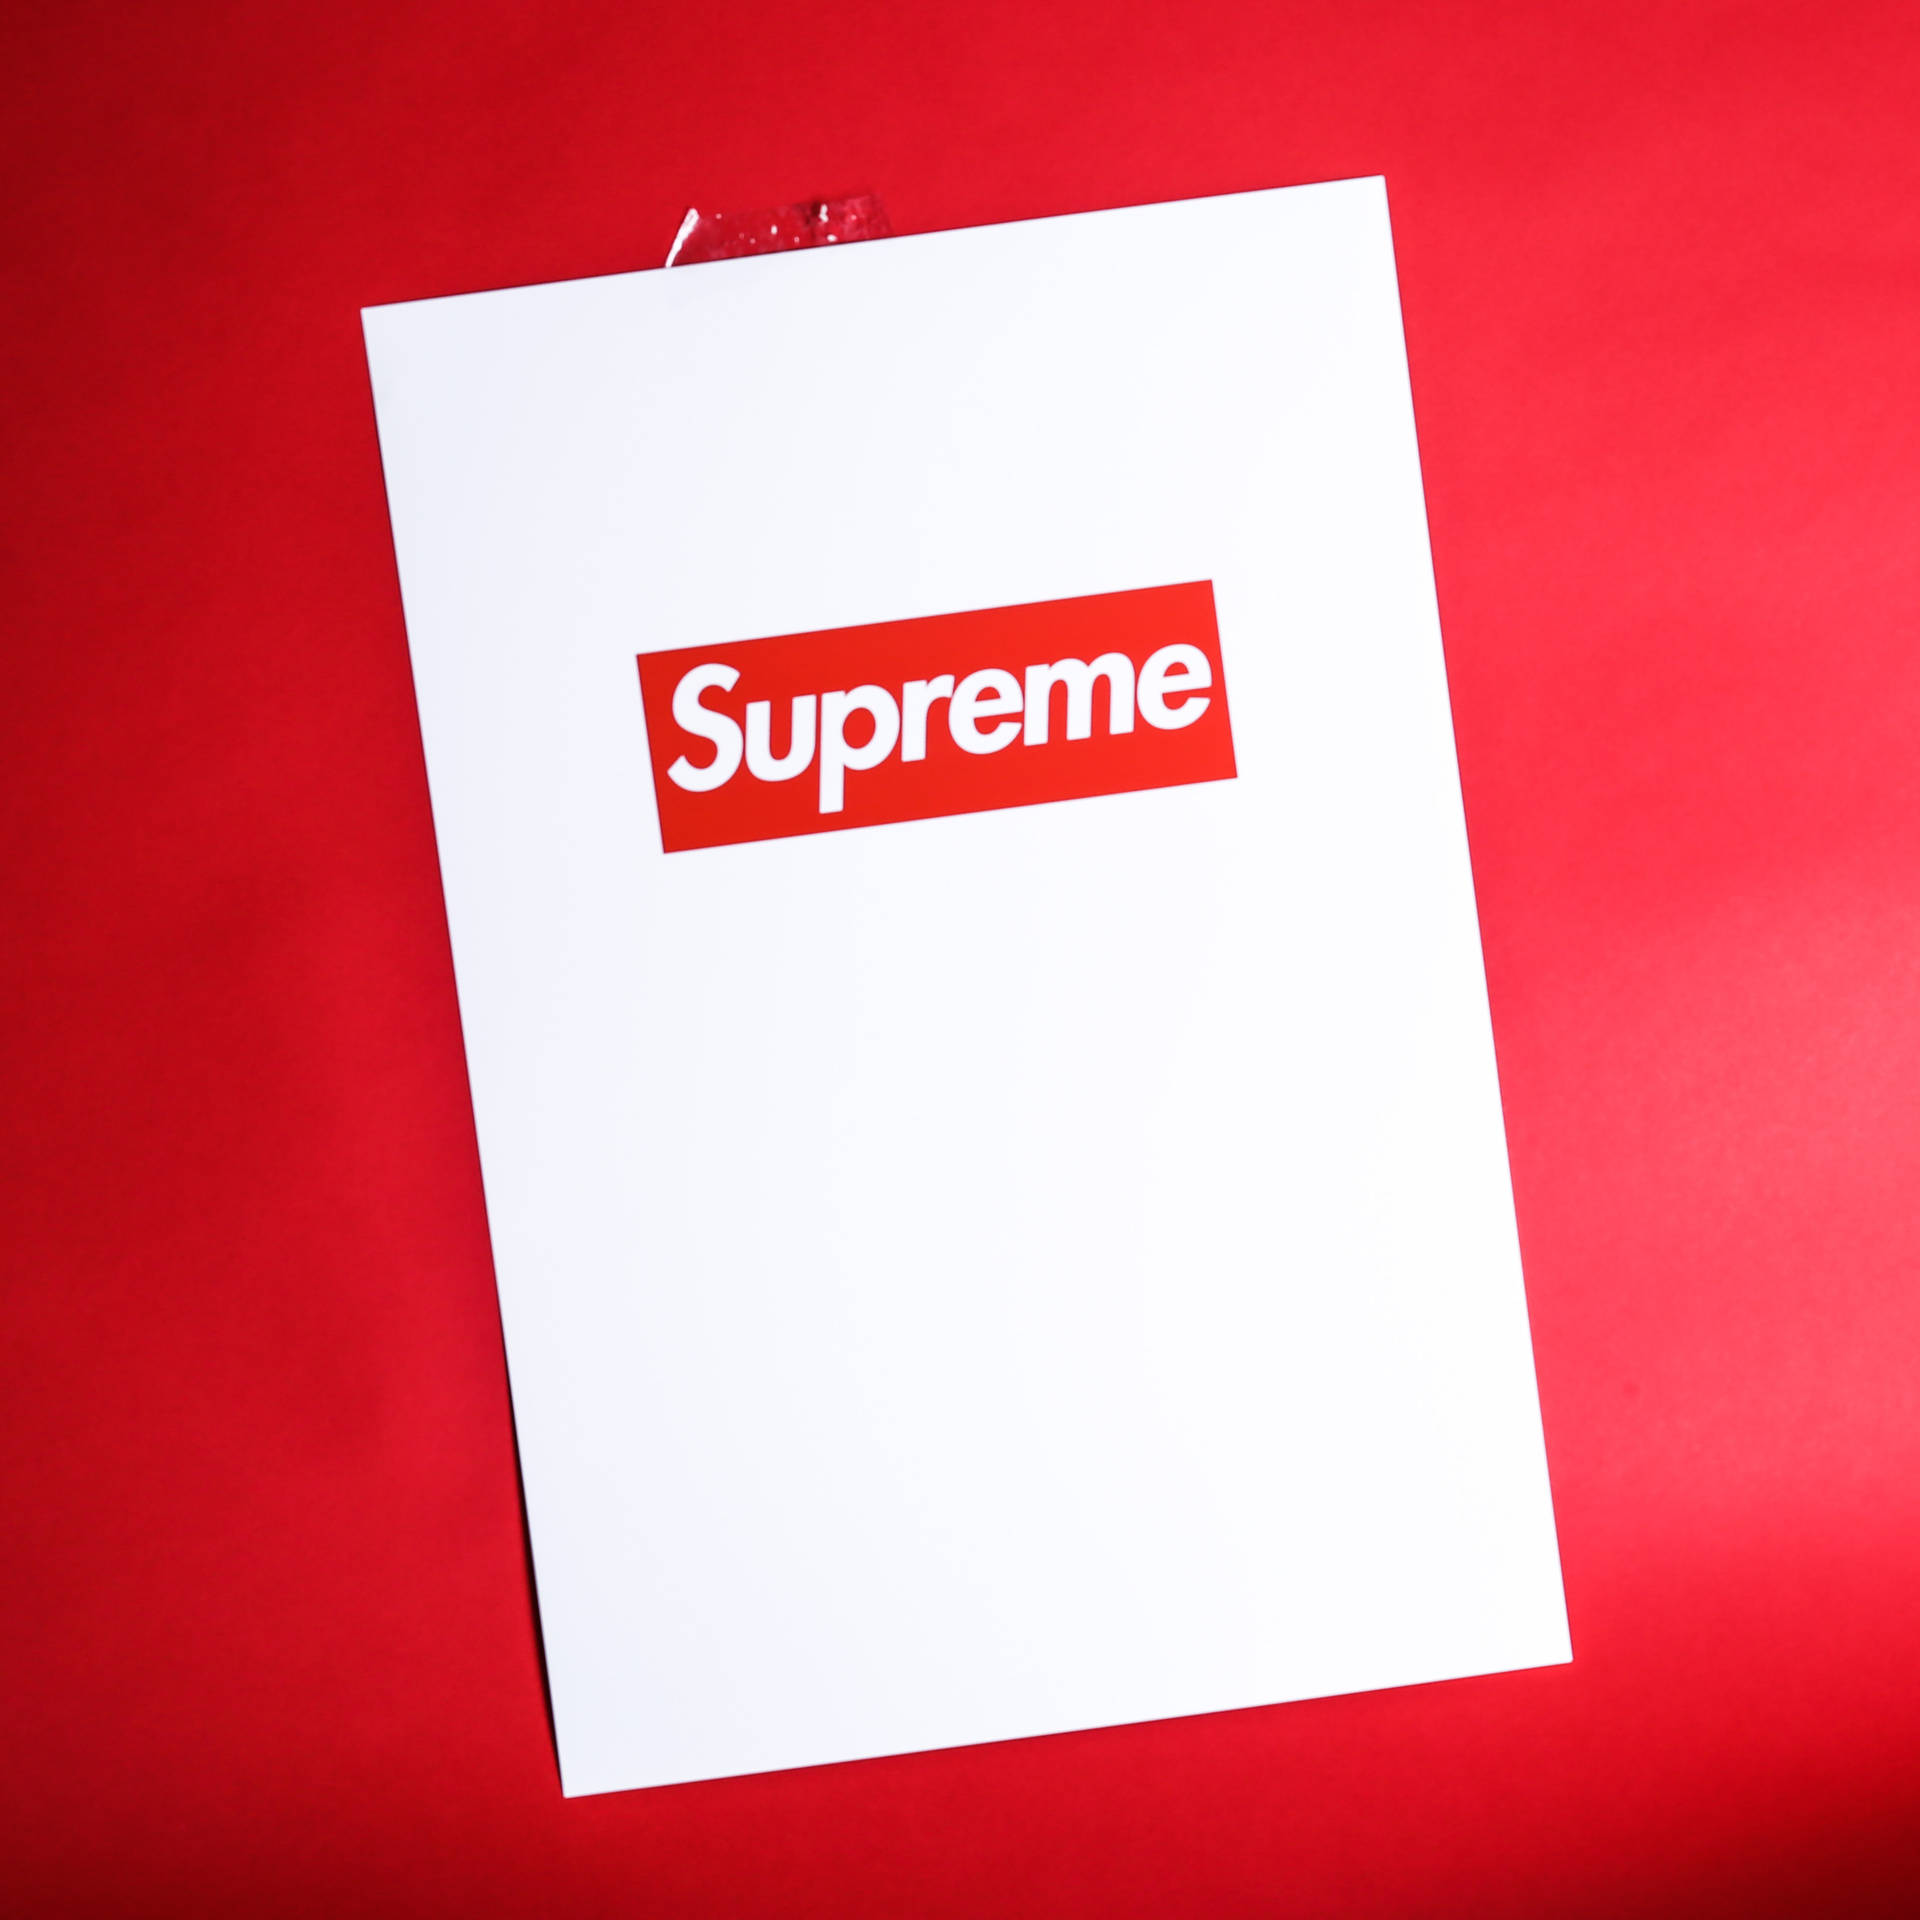 Supreme 7000X7000 Wallpaper and Background Image